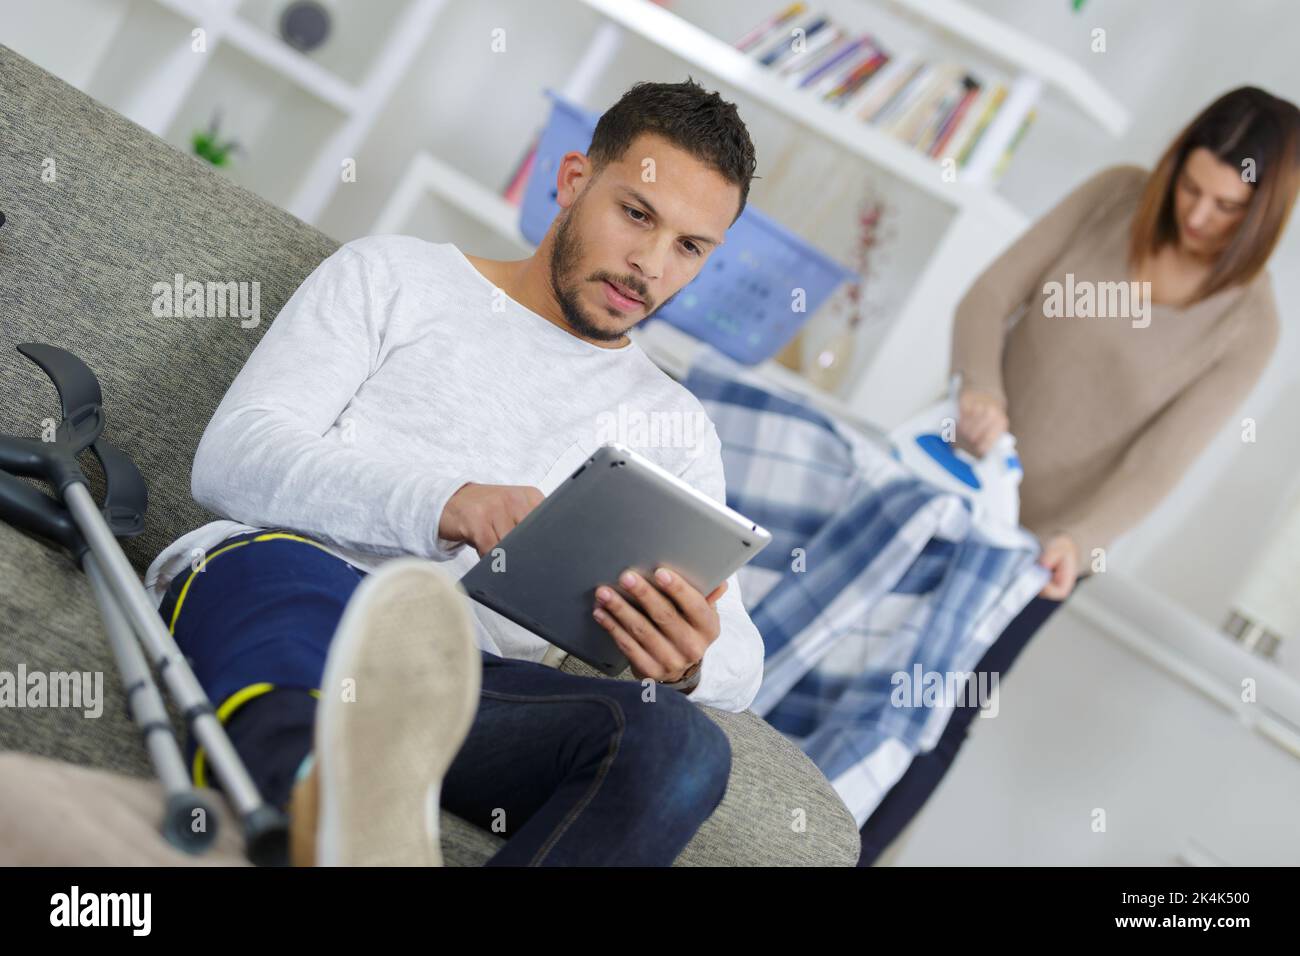 man using tablet while woman irons behind Stock Photo